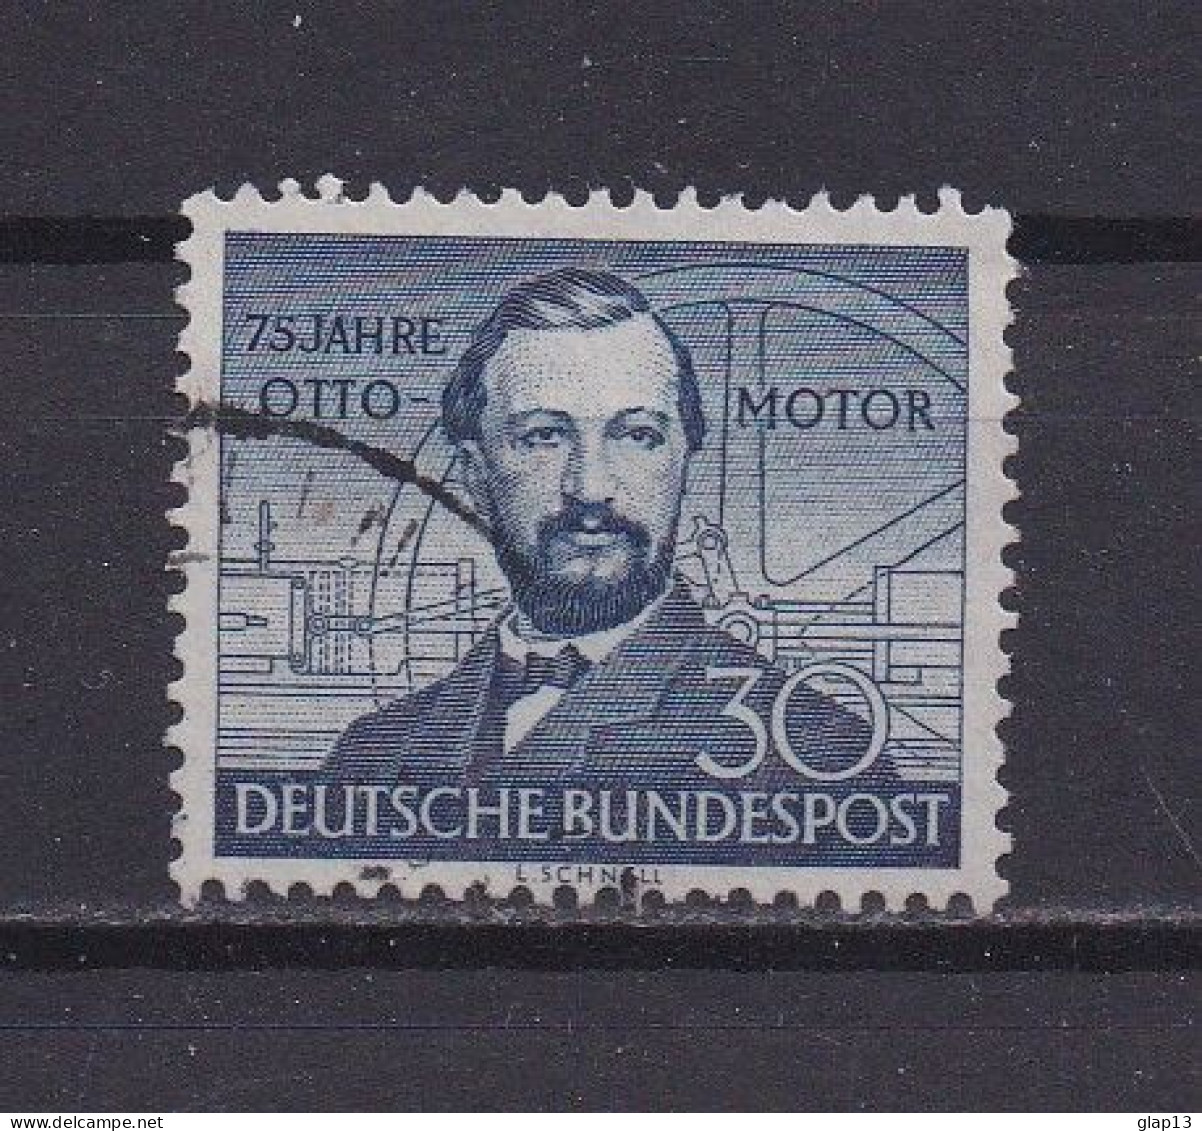 ALLEMAGNE FEDERALE 1952 TIMBRE N°35 OBLITERE NIKAULOS AUGUST OTTO - Gebraucht